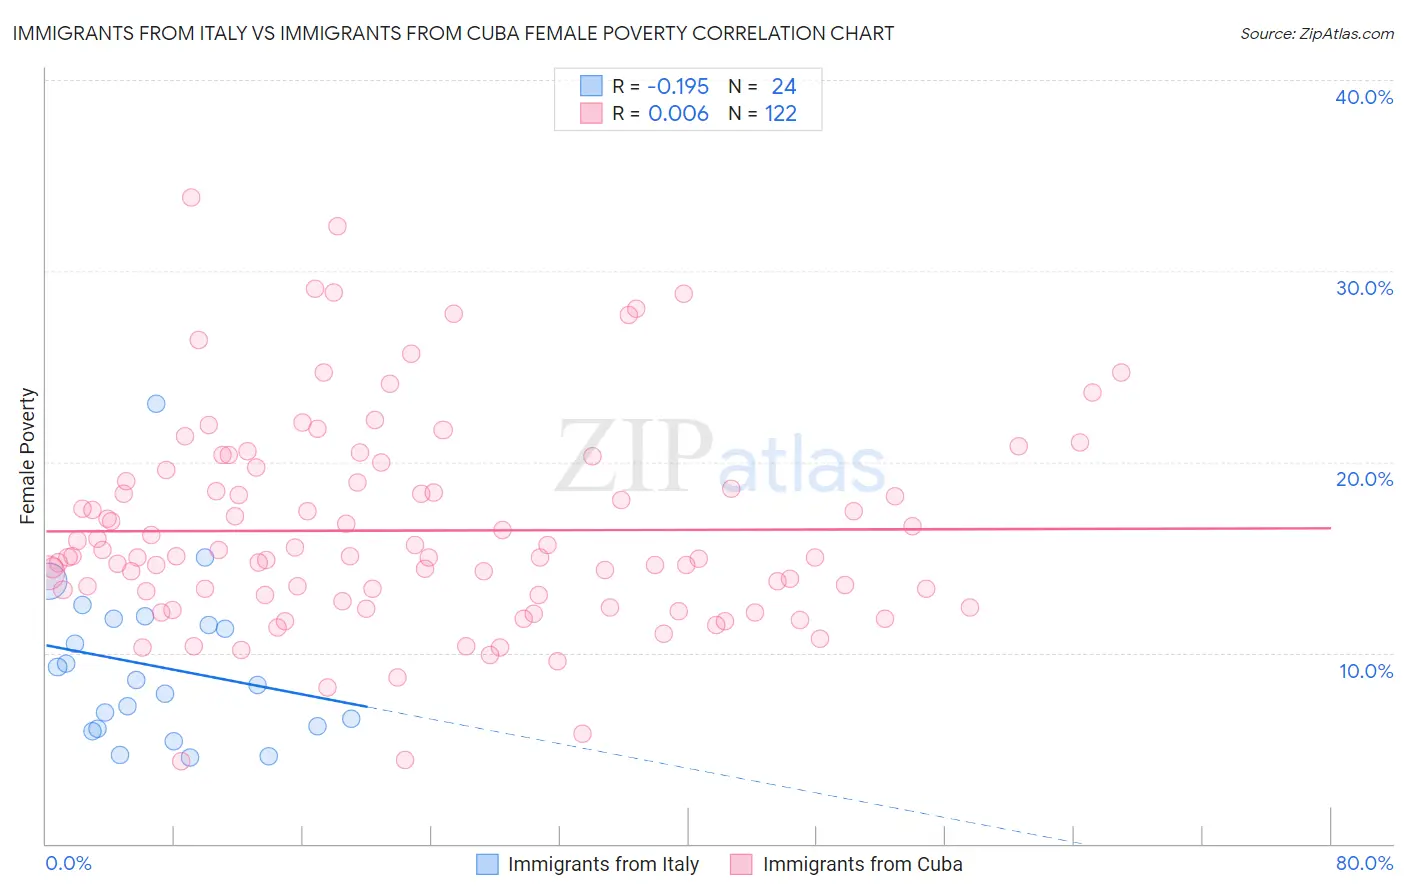 Immigrants from Italy vs Immigrants from Cuba Female Poverty